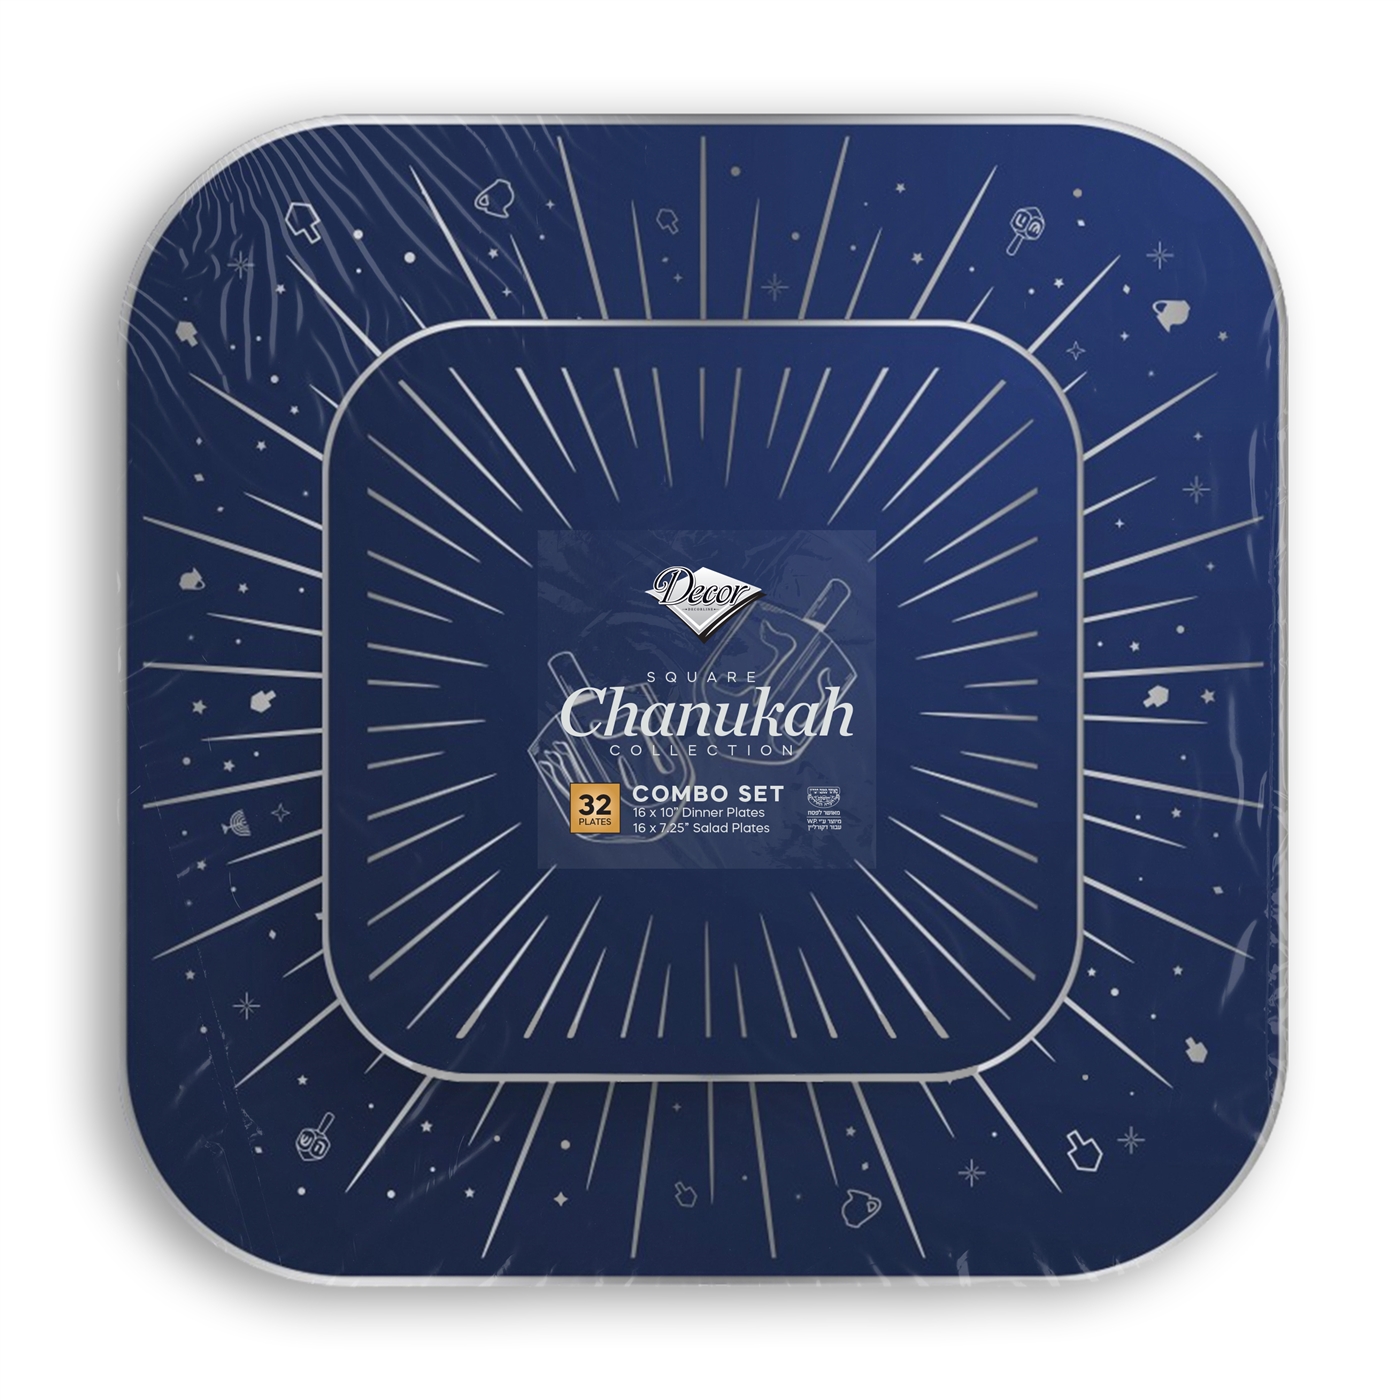 Decor Square Chanukah Collection Navy Blue with Silver